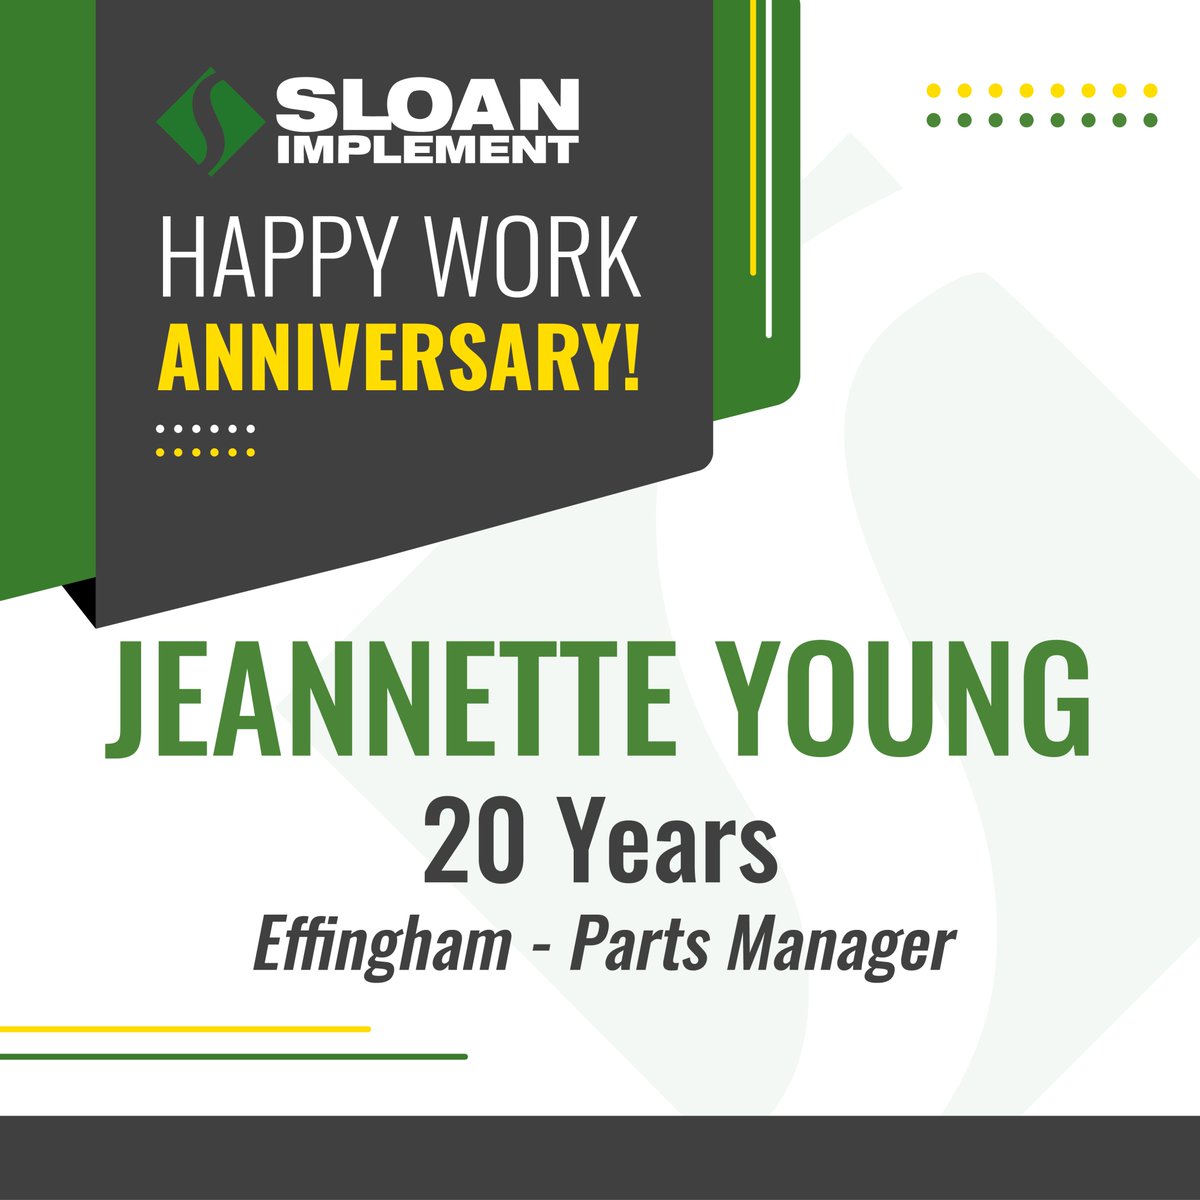 Happy Work Anniversary to Jeannette Young! 🎉 Jeannette is the Parts Manager at our Effingham location. We are thankful for the last 20 years and look forward to the years to come! 👏👏 - #johndeerecareer #johndeere #sloans #sloanimplement #agriculture #careerinag